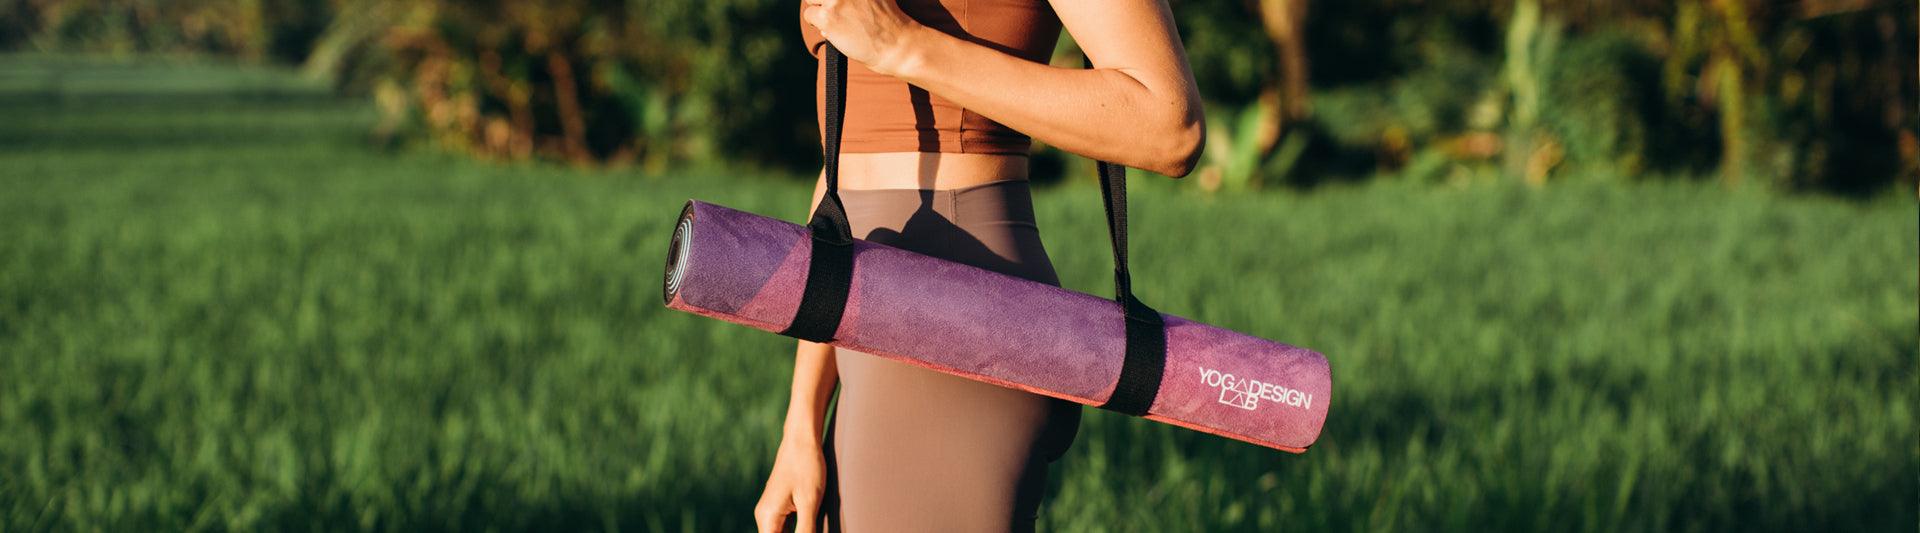 YDL Yoga Mats Collection | Non-Slip, Durable, and Eco-Friendly - Yoga Design Lab 